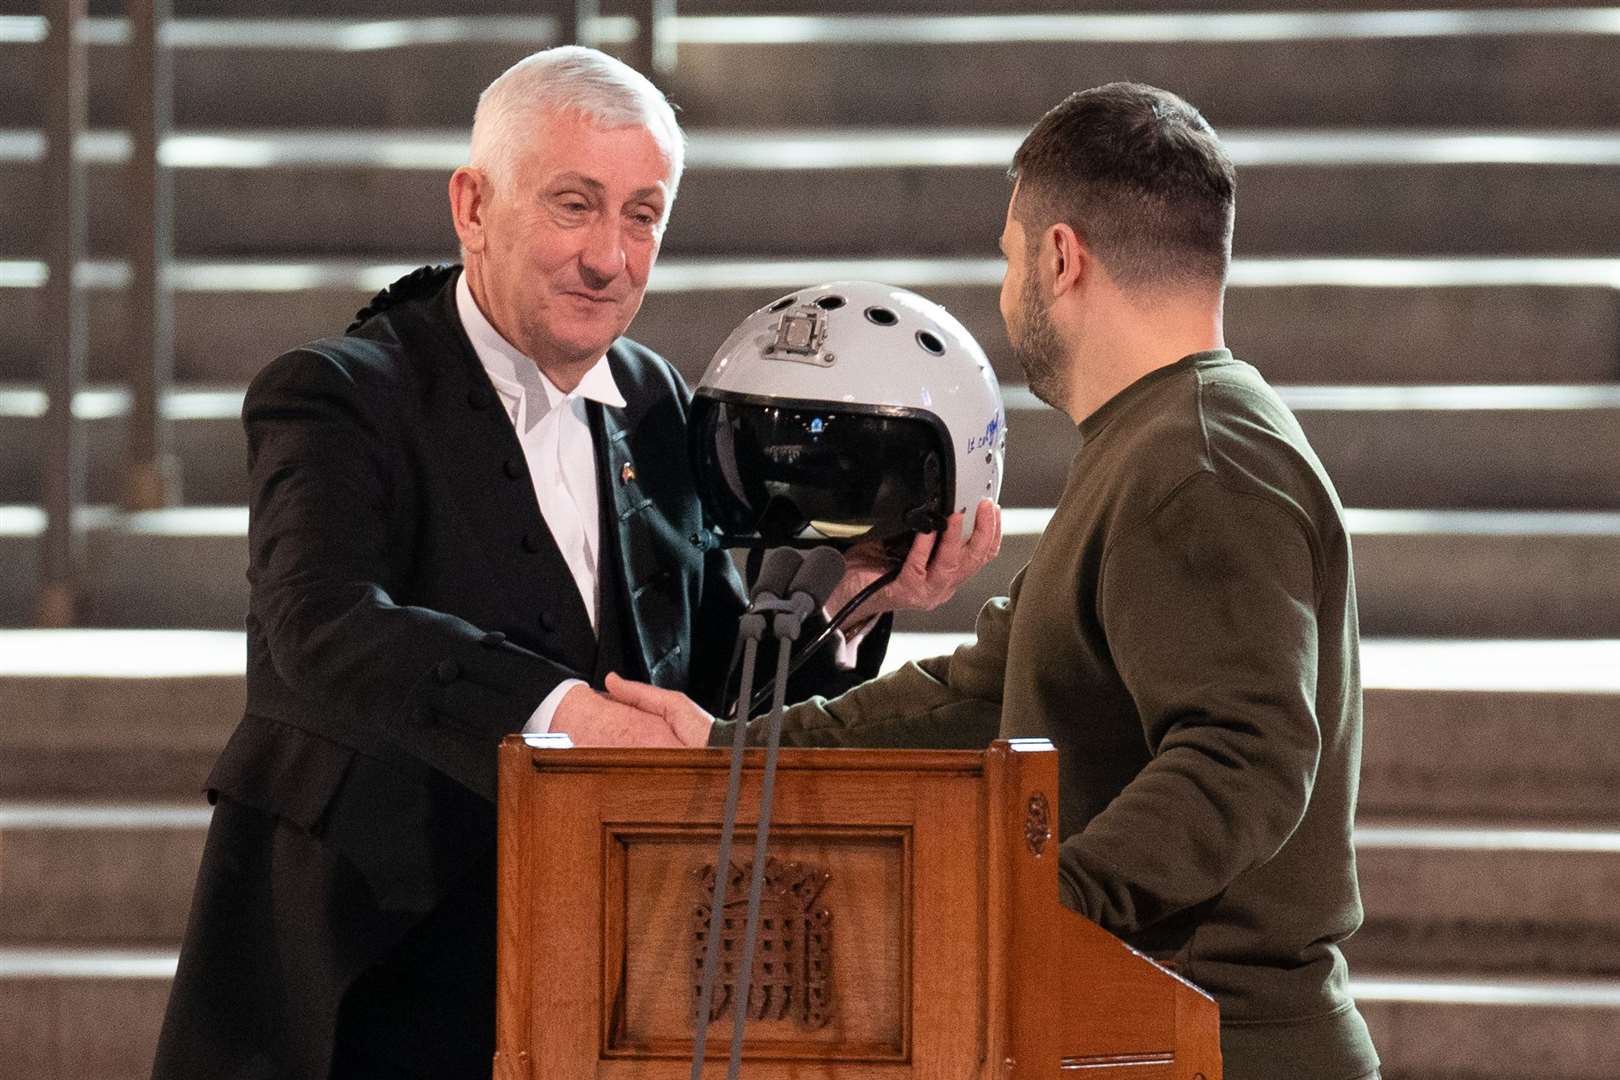 Sir Lindsay Hoyle was given the helmet of a Ukrainian pilot by President Volodymyr Zelensky when he welcomed him to Parliament (Stefan Rousseau/PA)